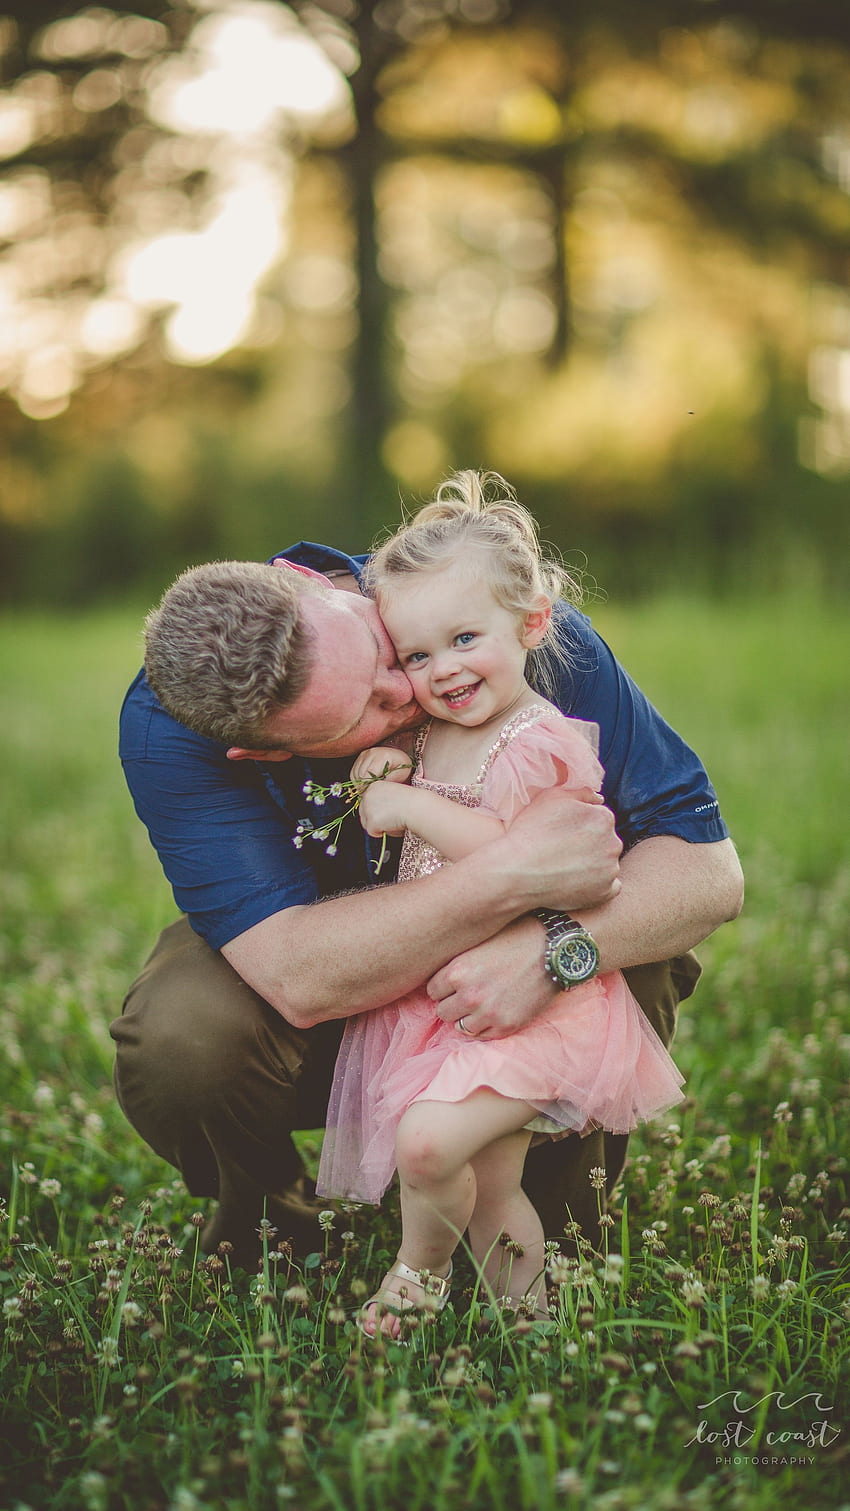 Father-Daughter Dance Songs: 100+ Best Songs & Expert Tips